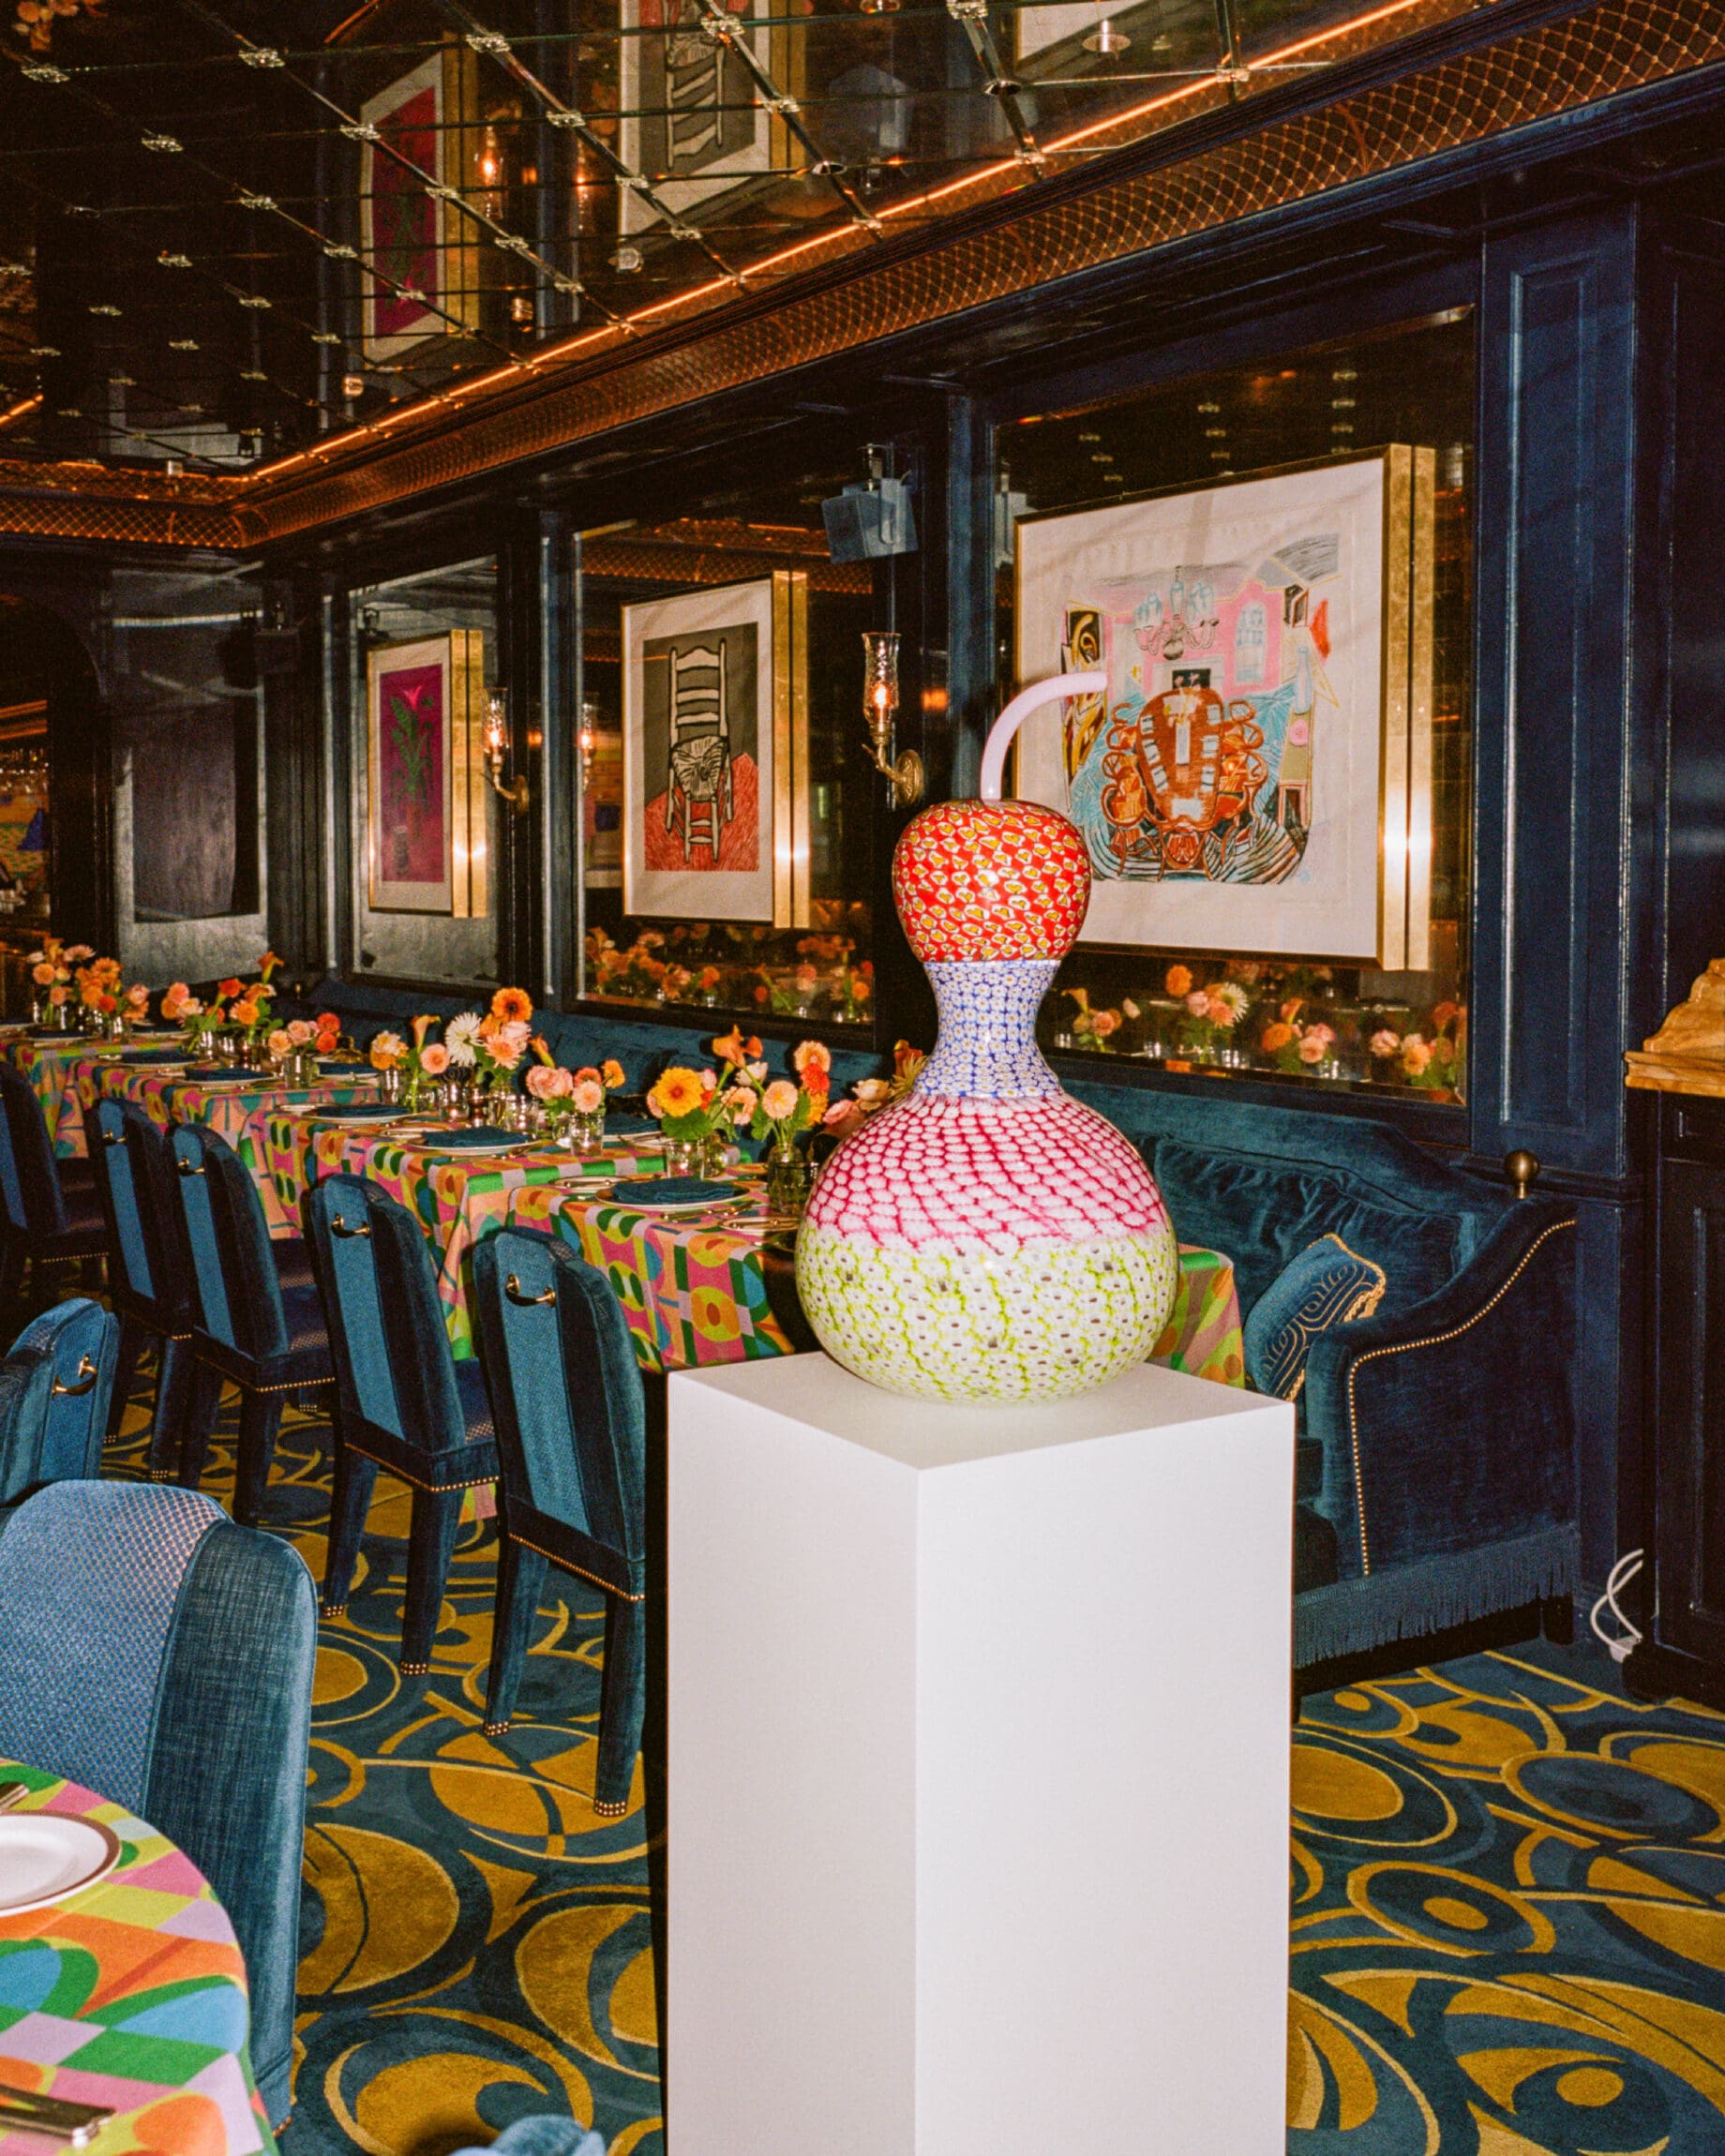 Yinka Ilori on the importance of joy and affirmation in his practice | Yinka Ilori's original murano glass sculpture on a plinth inside Mayfair private member's club George.